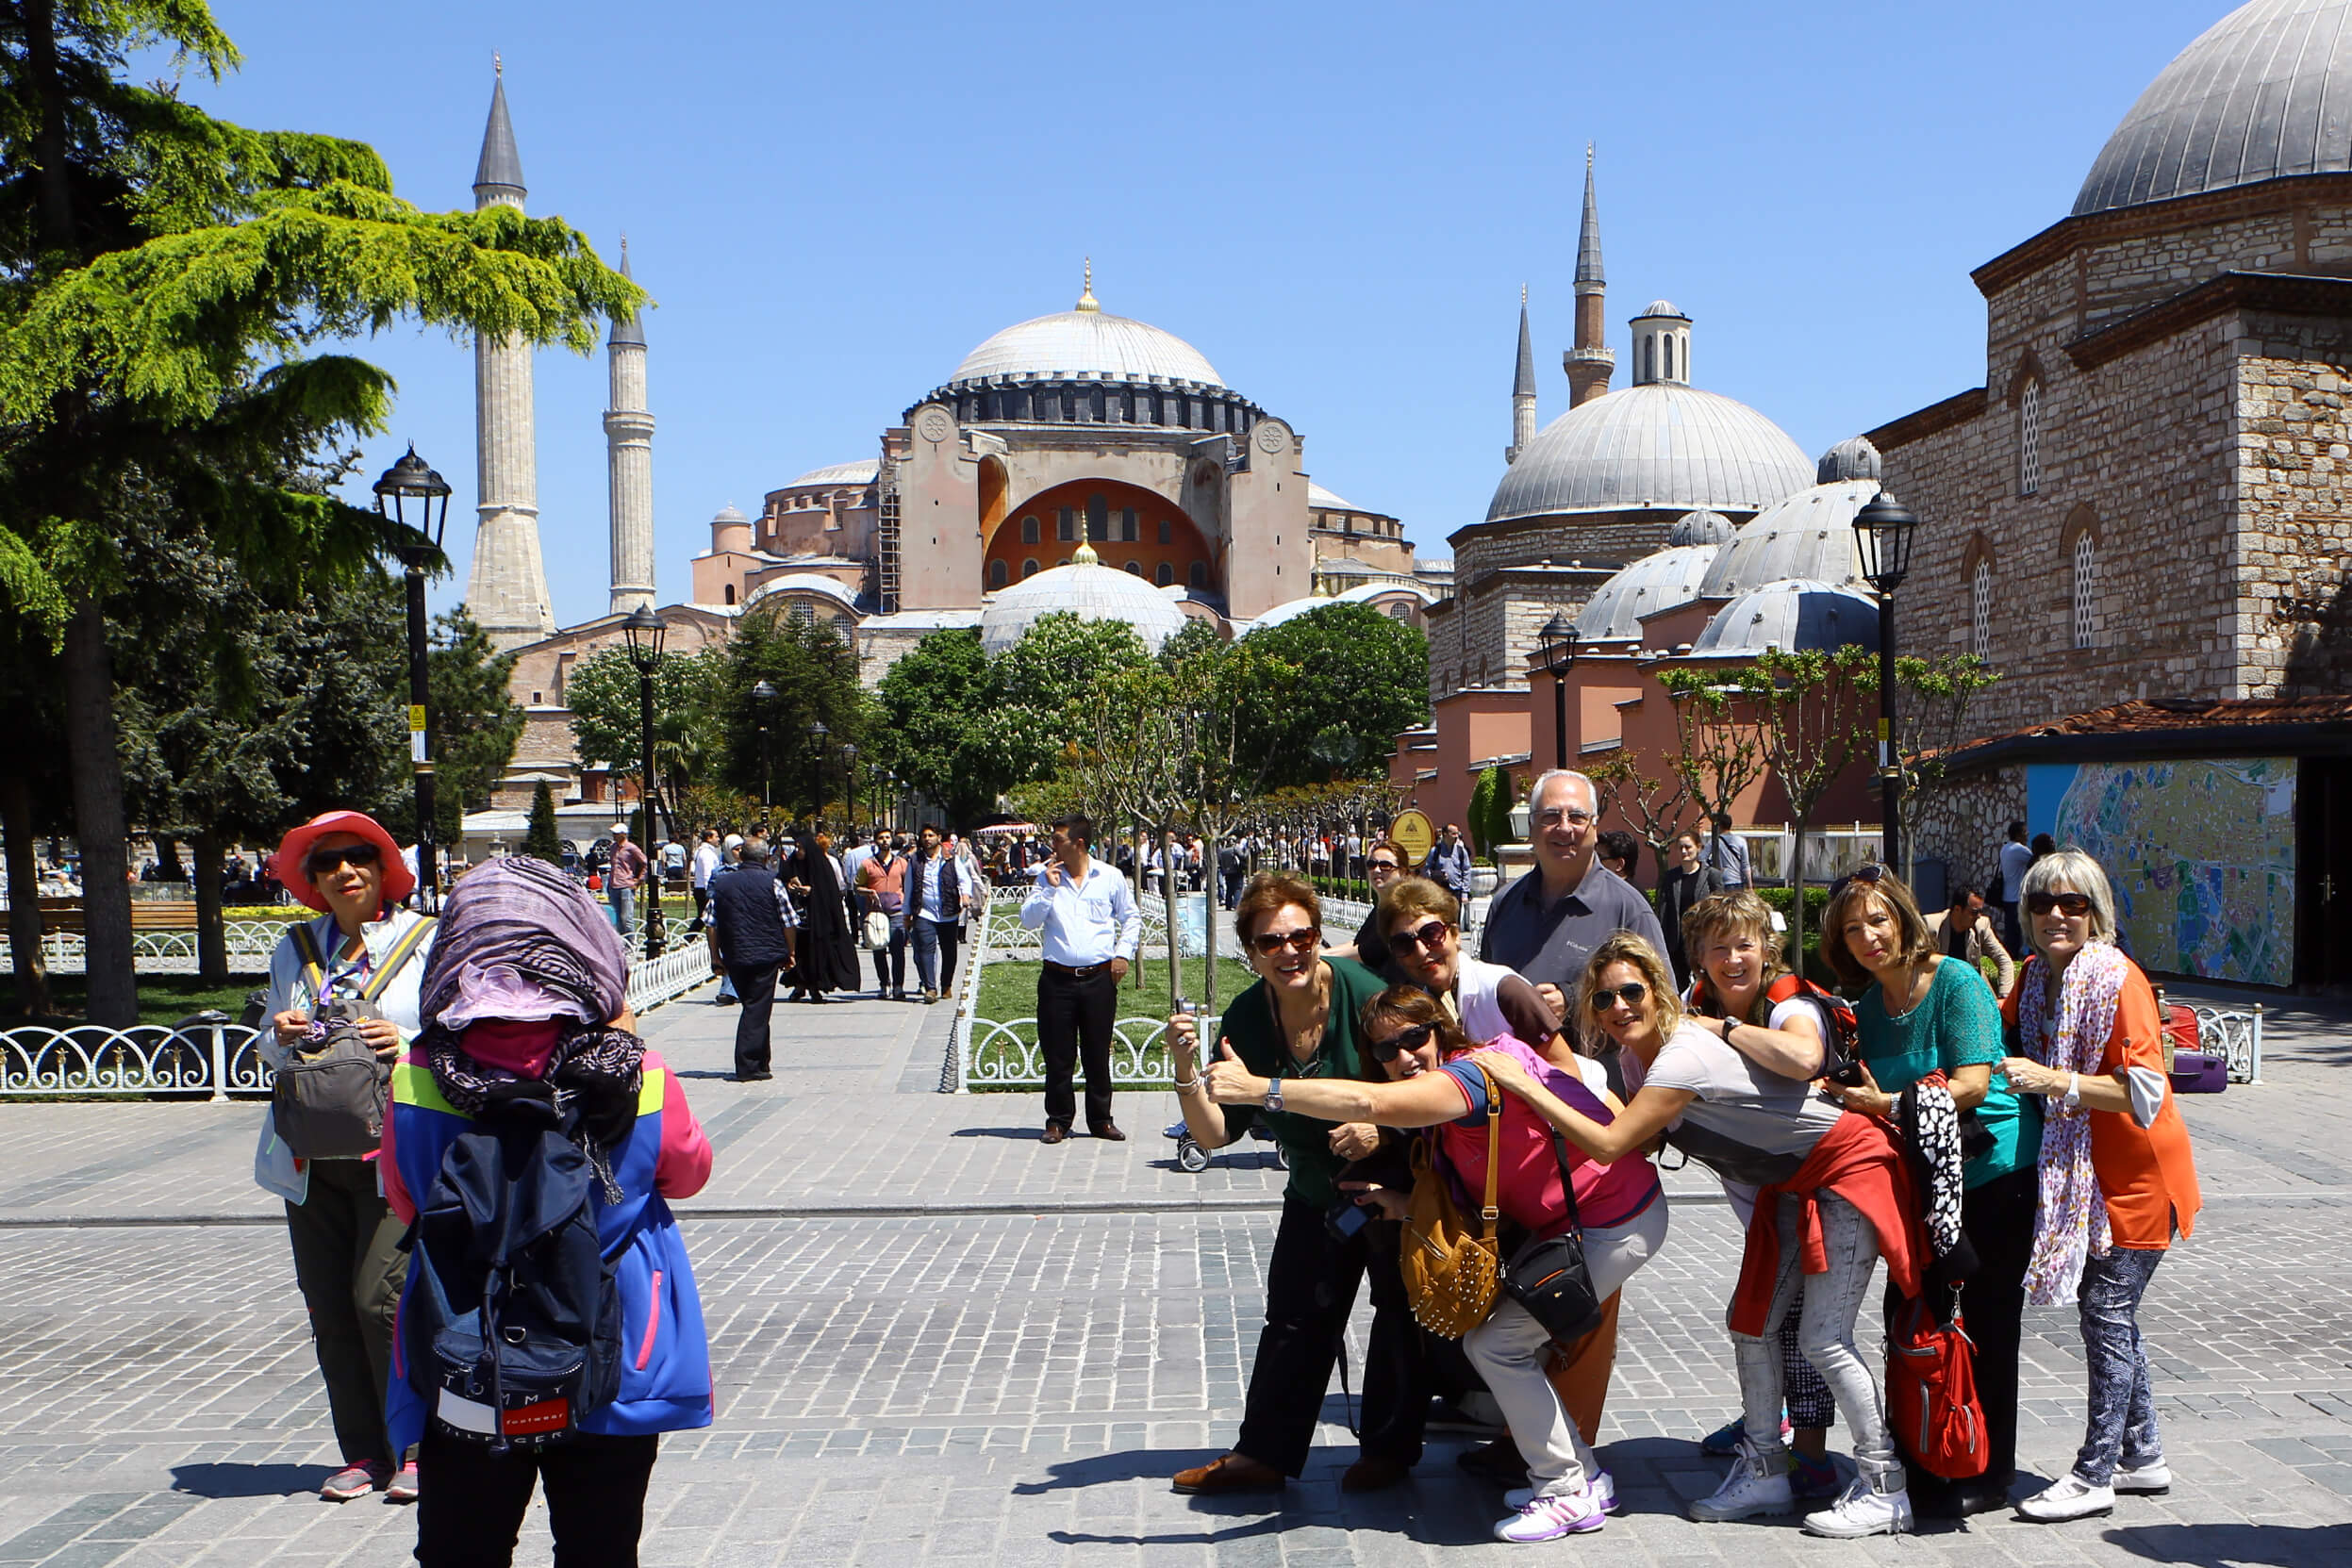 Turkey's tourism is set to soar this year as European holidaymakers return 